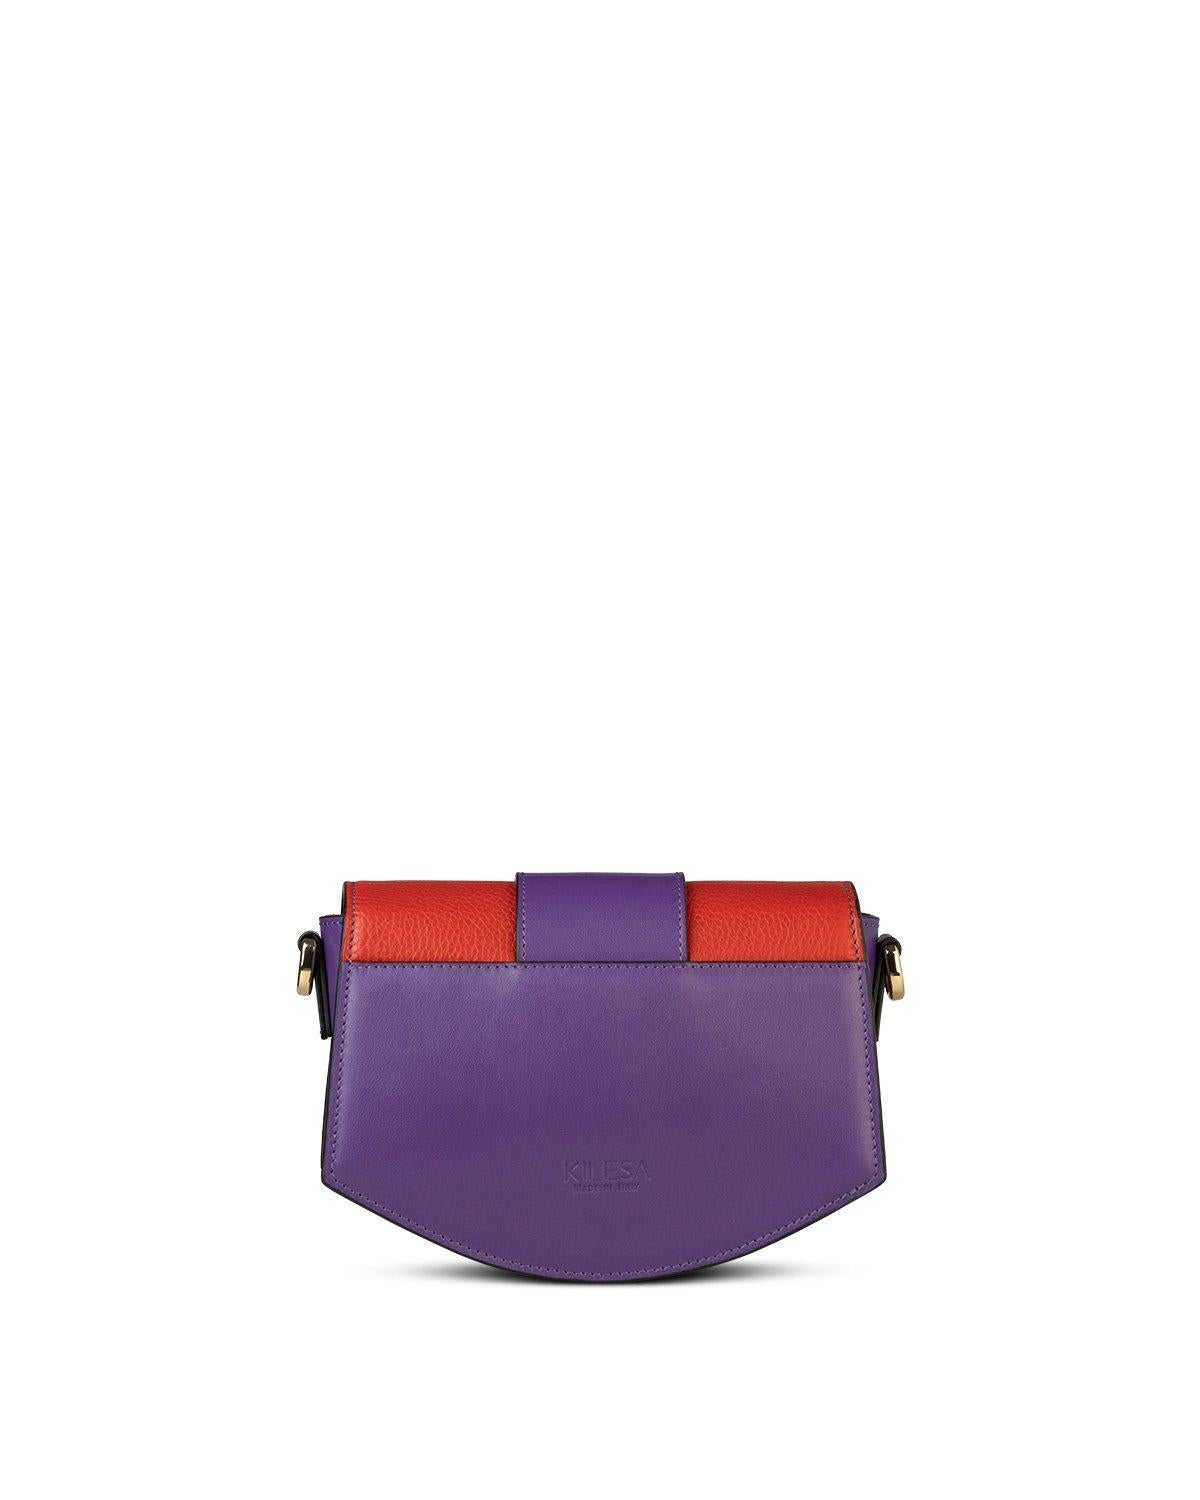 Multicoloured calf leather shoulder bag NWOT
Material: calf leather
100% Made in Italy
Removable shoulder strap